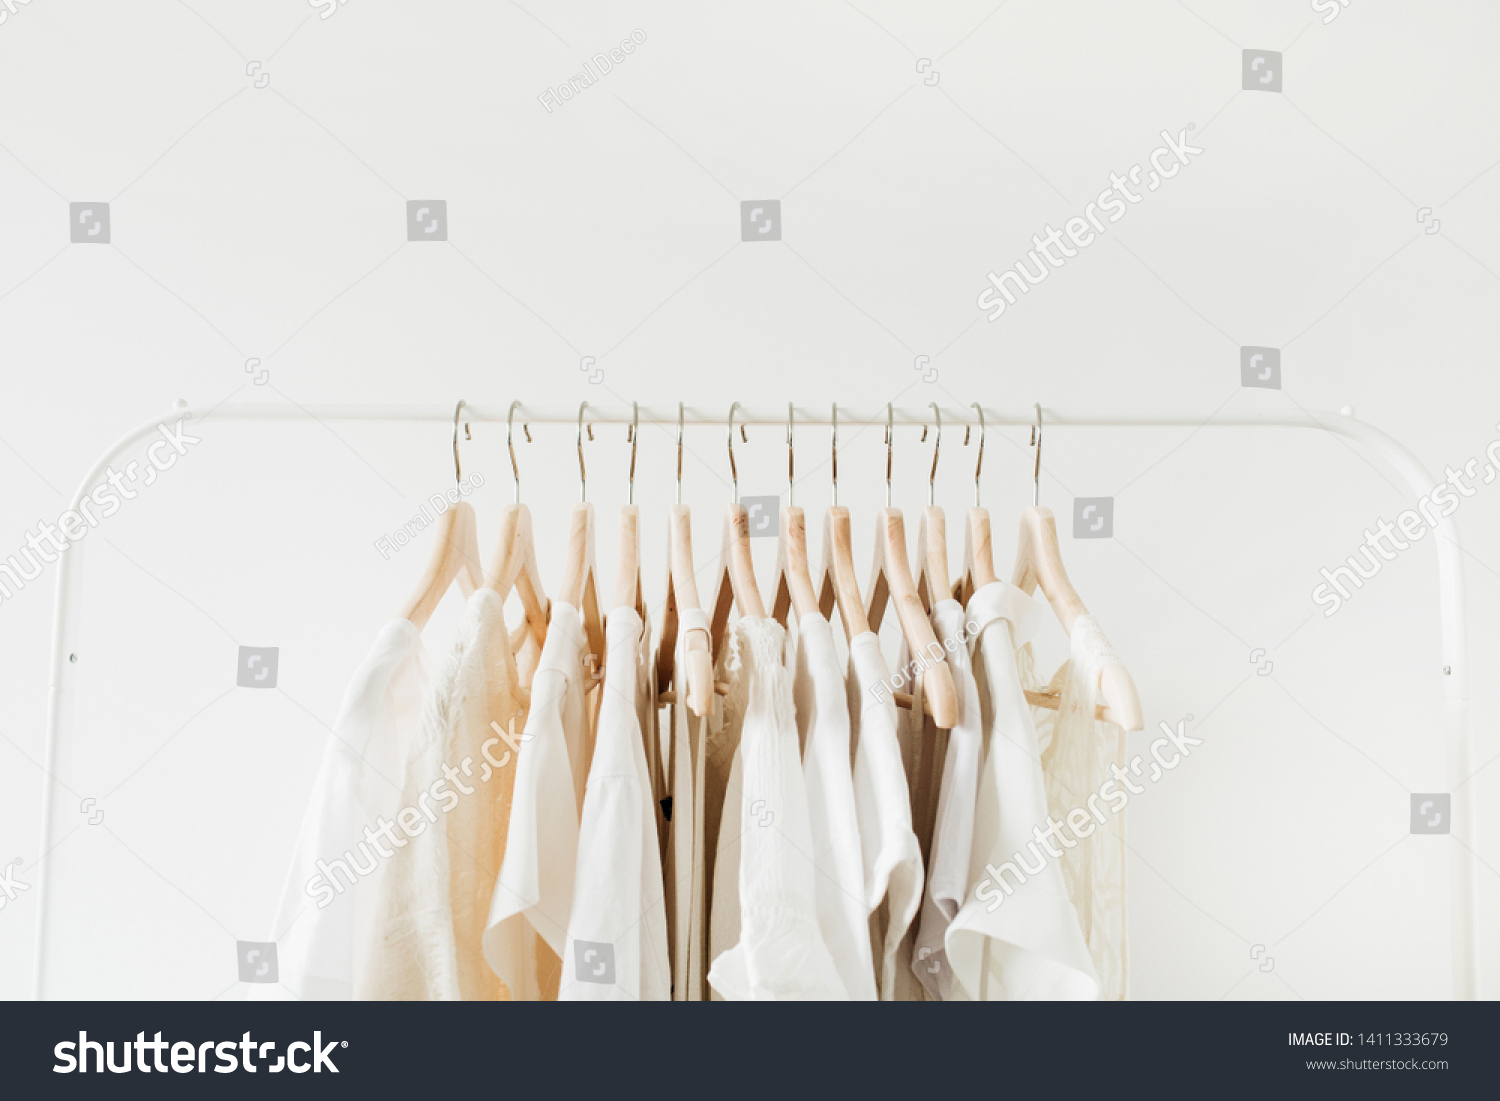 Minimal fashion clothes concept. Female blouses and t-shirts on hanger on white background. Fashion blog, website, social media hero header. #1411333679